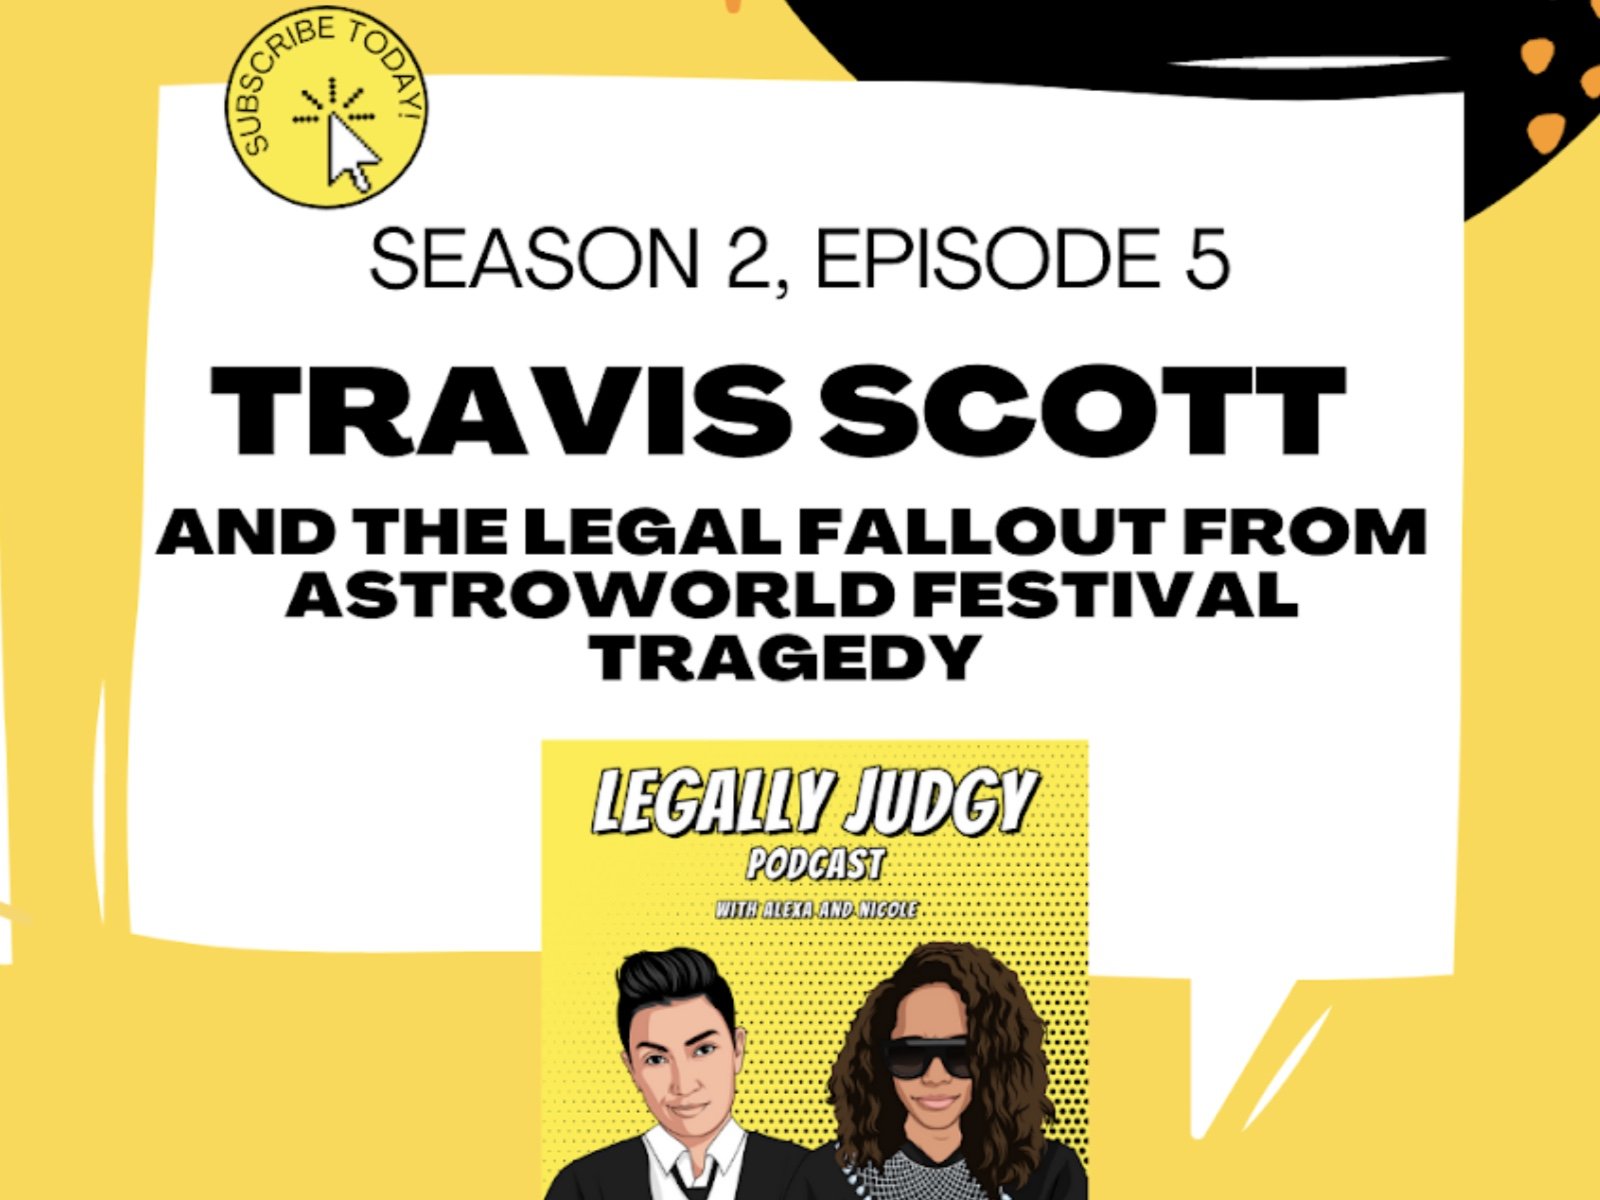 Here's over 60 minutes of breaking Travis Scott's 'Astroworld Fest' from real attorneys — Attack Culture